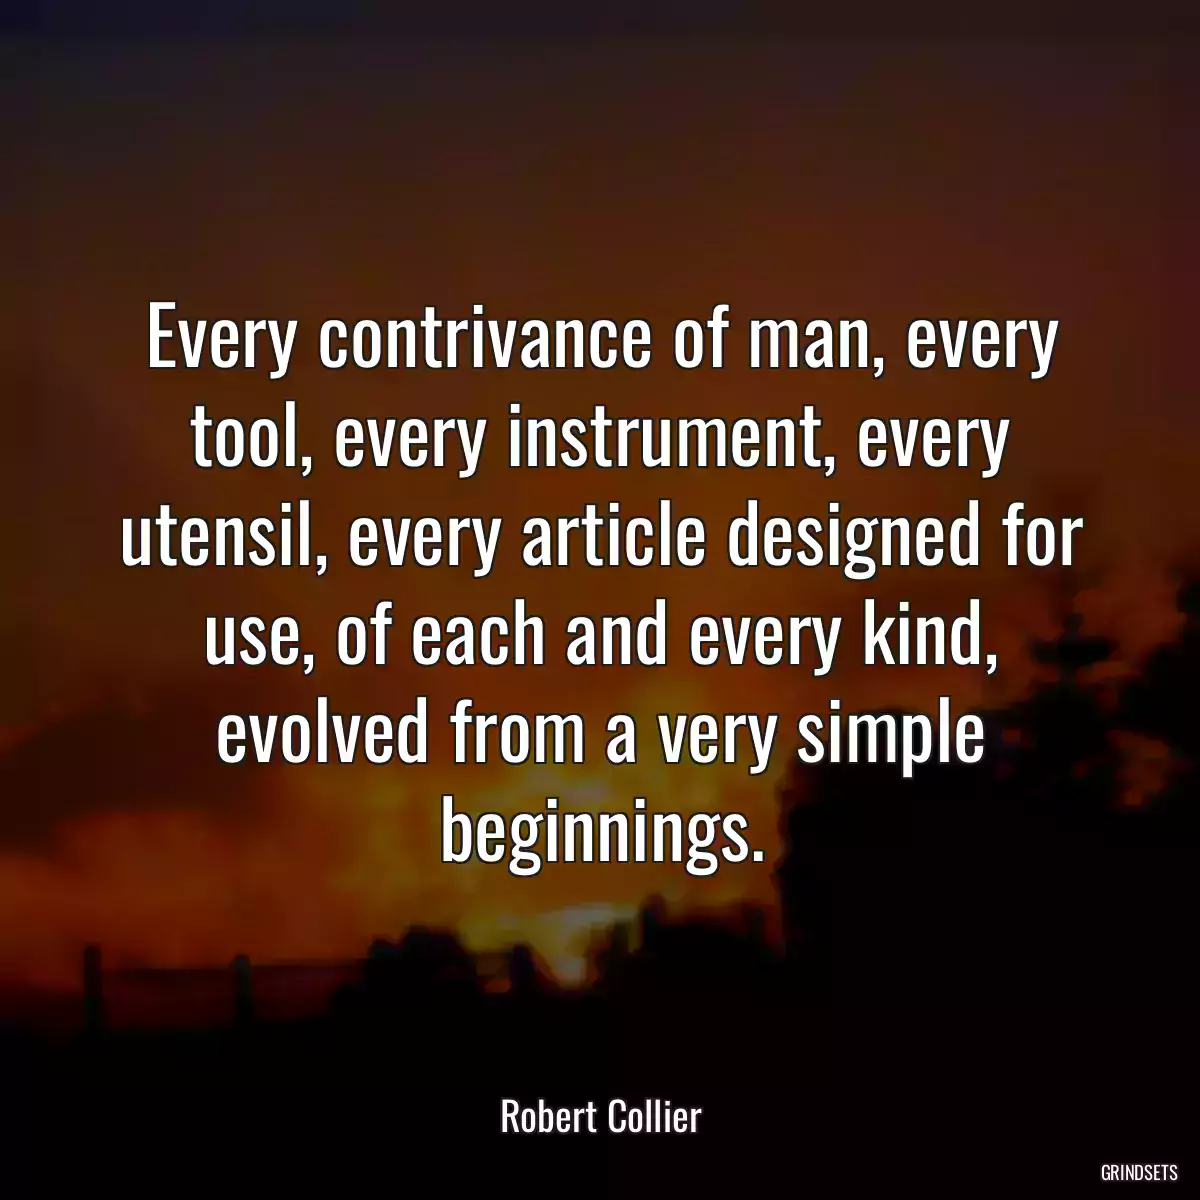 Every contrivance of man, every tool, every instrument, every utensil, every article designed for use, of each and every kind, evolved from a very simple beginnings.